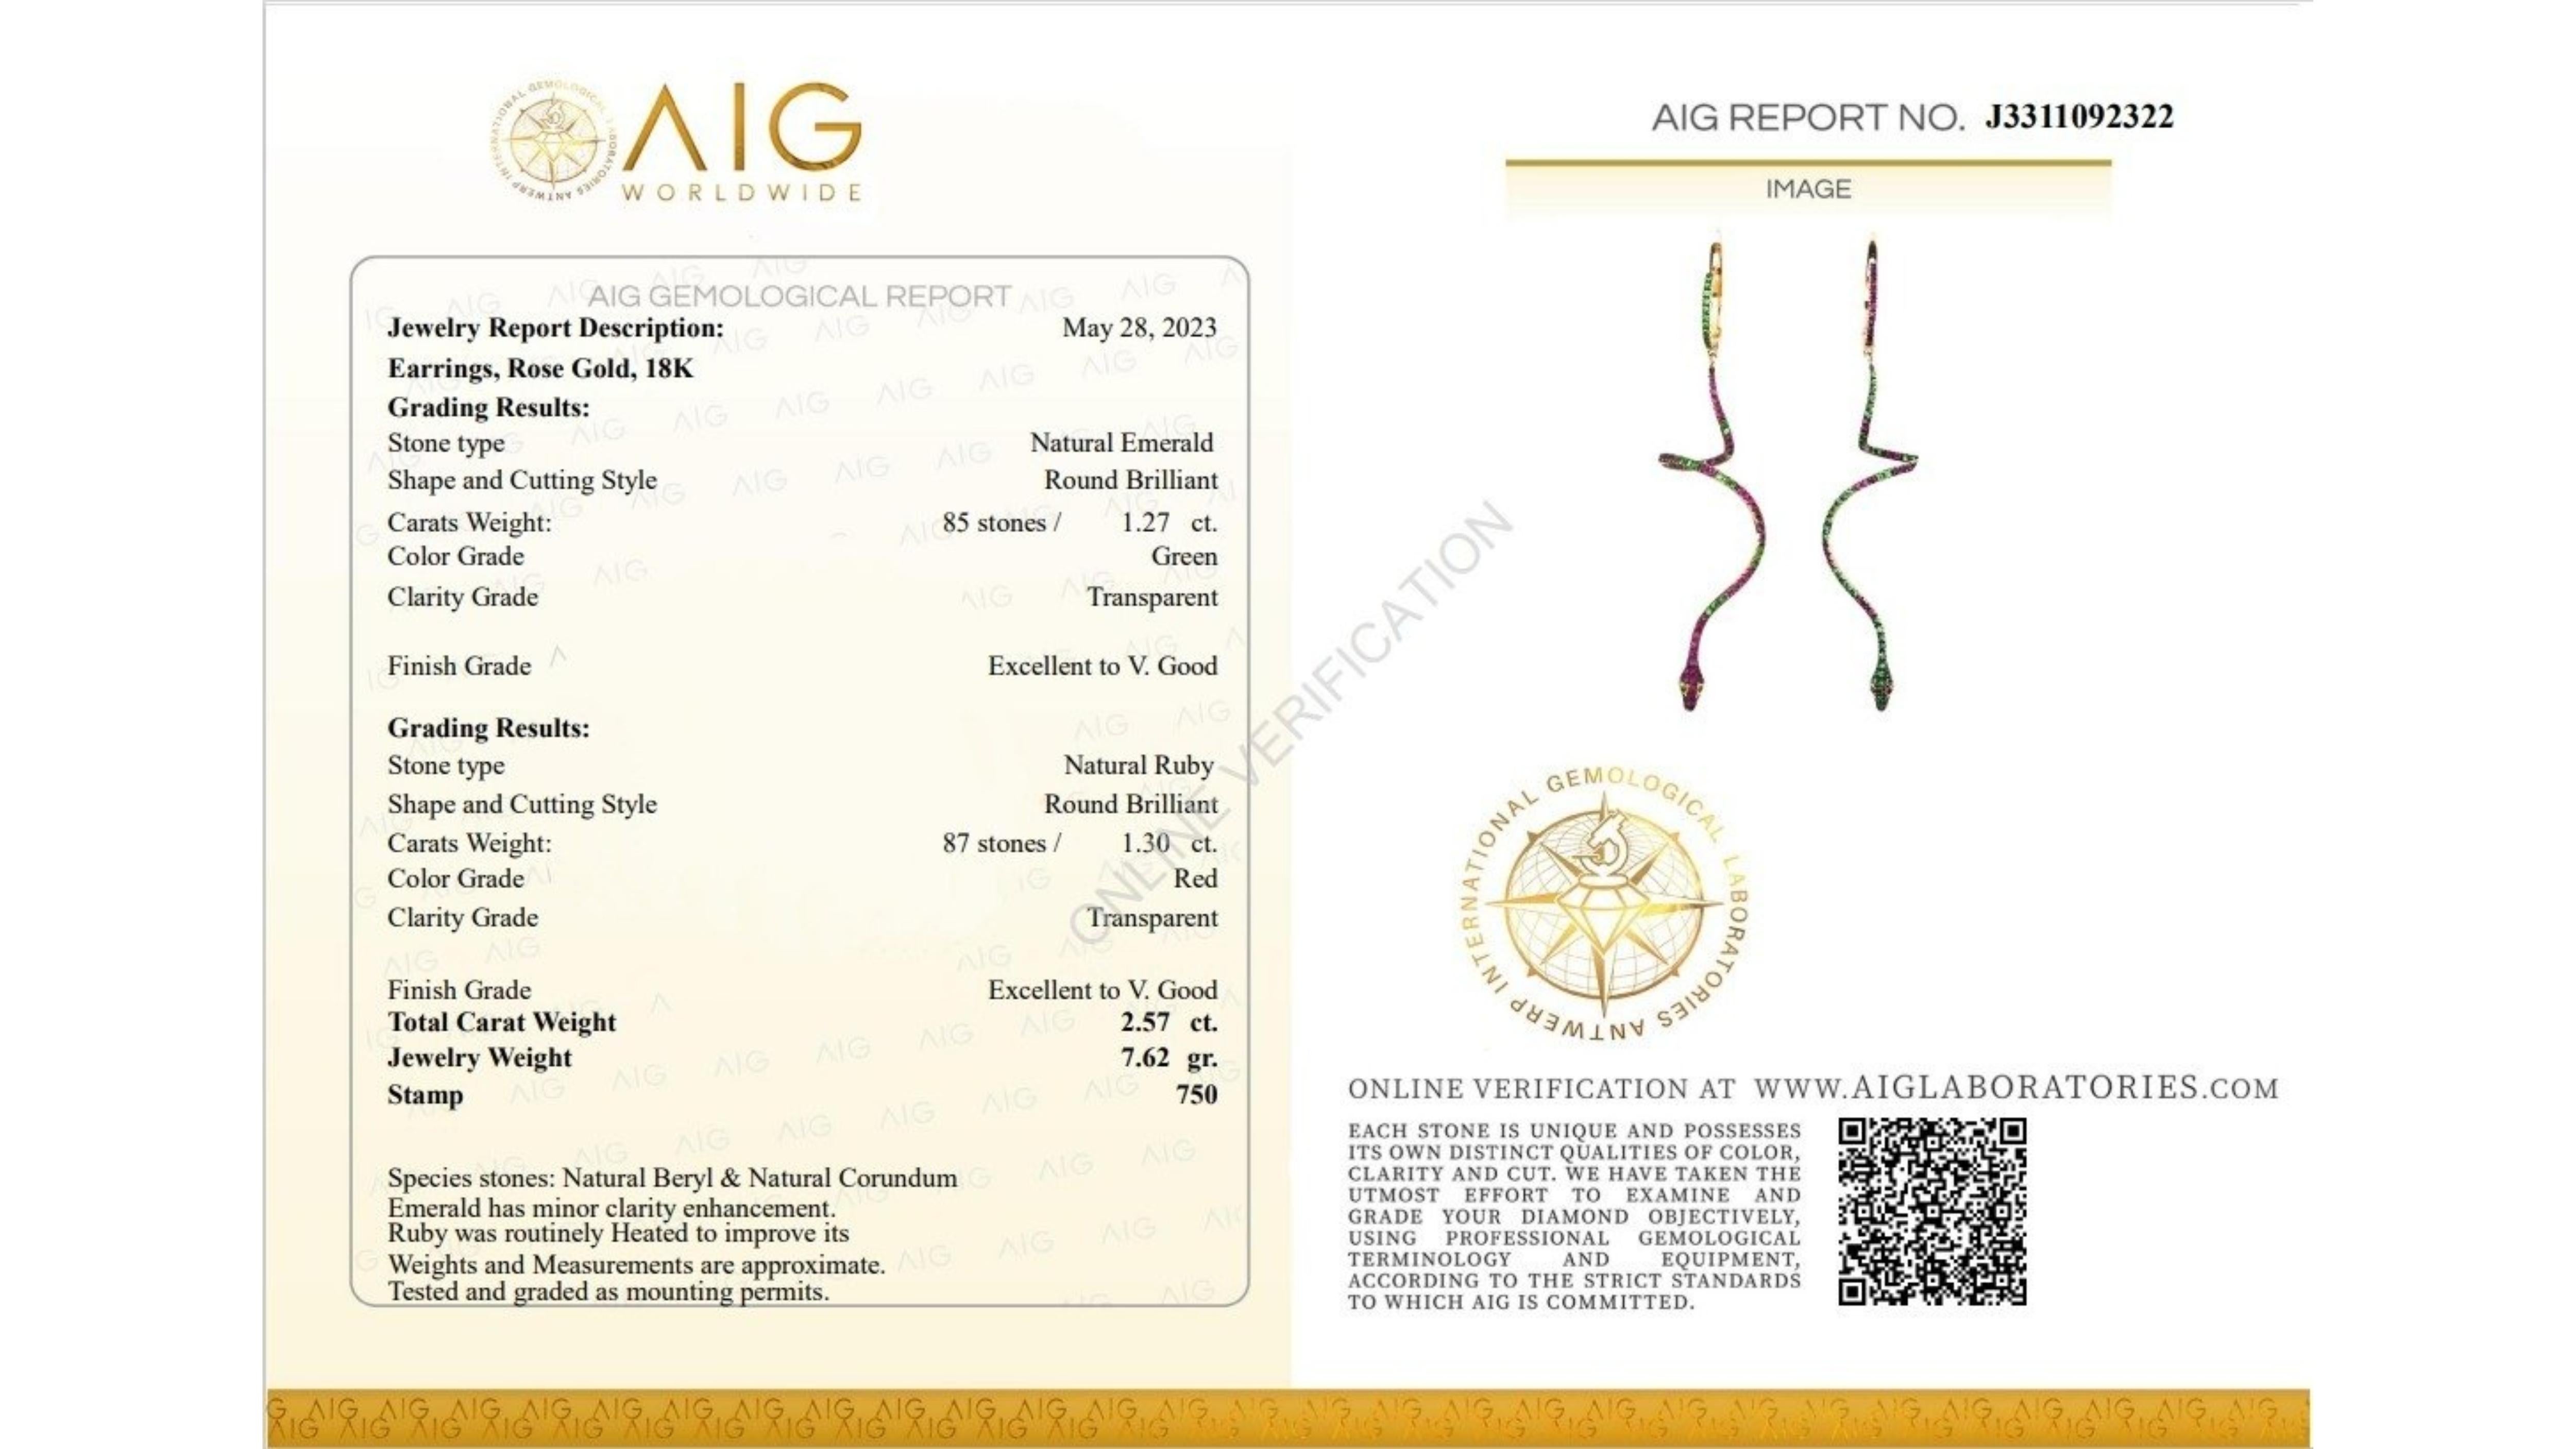 A snake-designed pair of earrings with a dazzling 1.27 carat round brilliant natural emerald. It has 1.3 carat of side rubies which add more to its elegance. The jewelry is made of 18K Pink Gold with a high-quality polish. It comes with an AIG